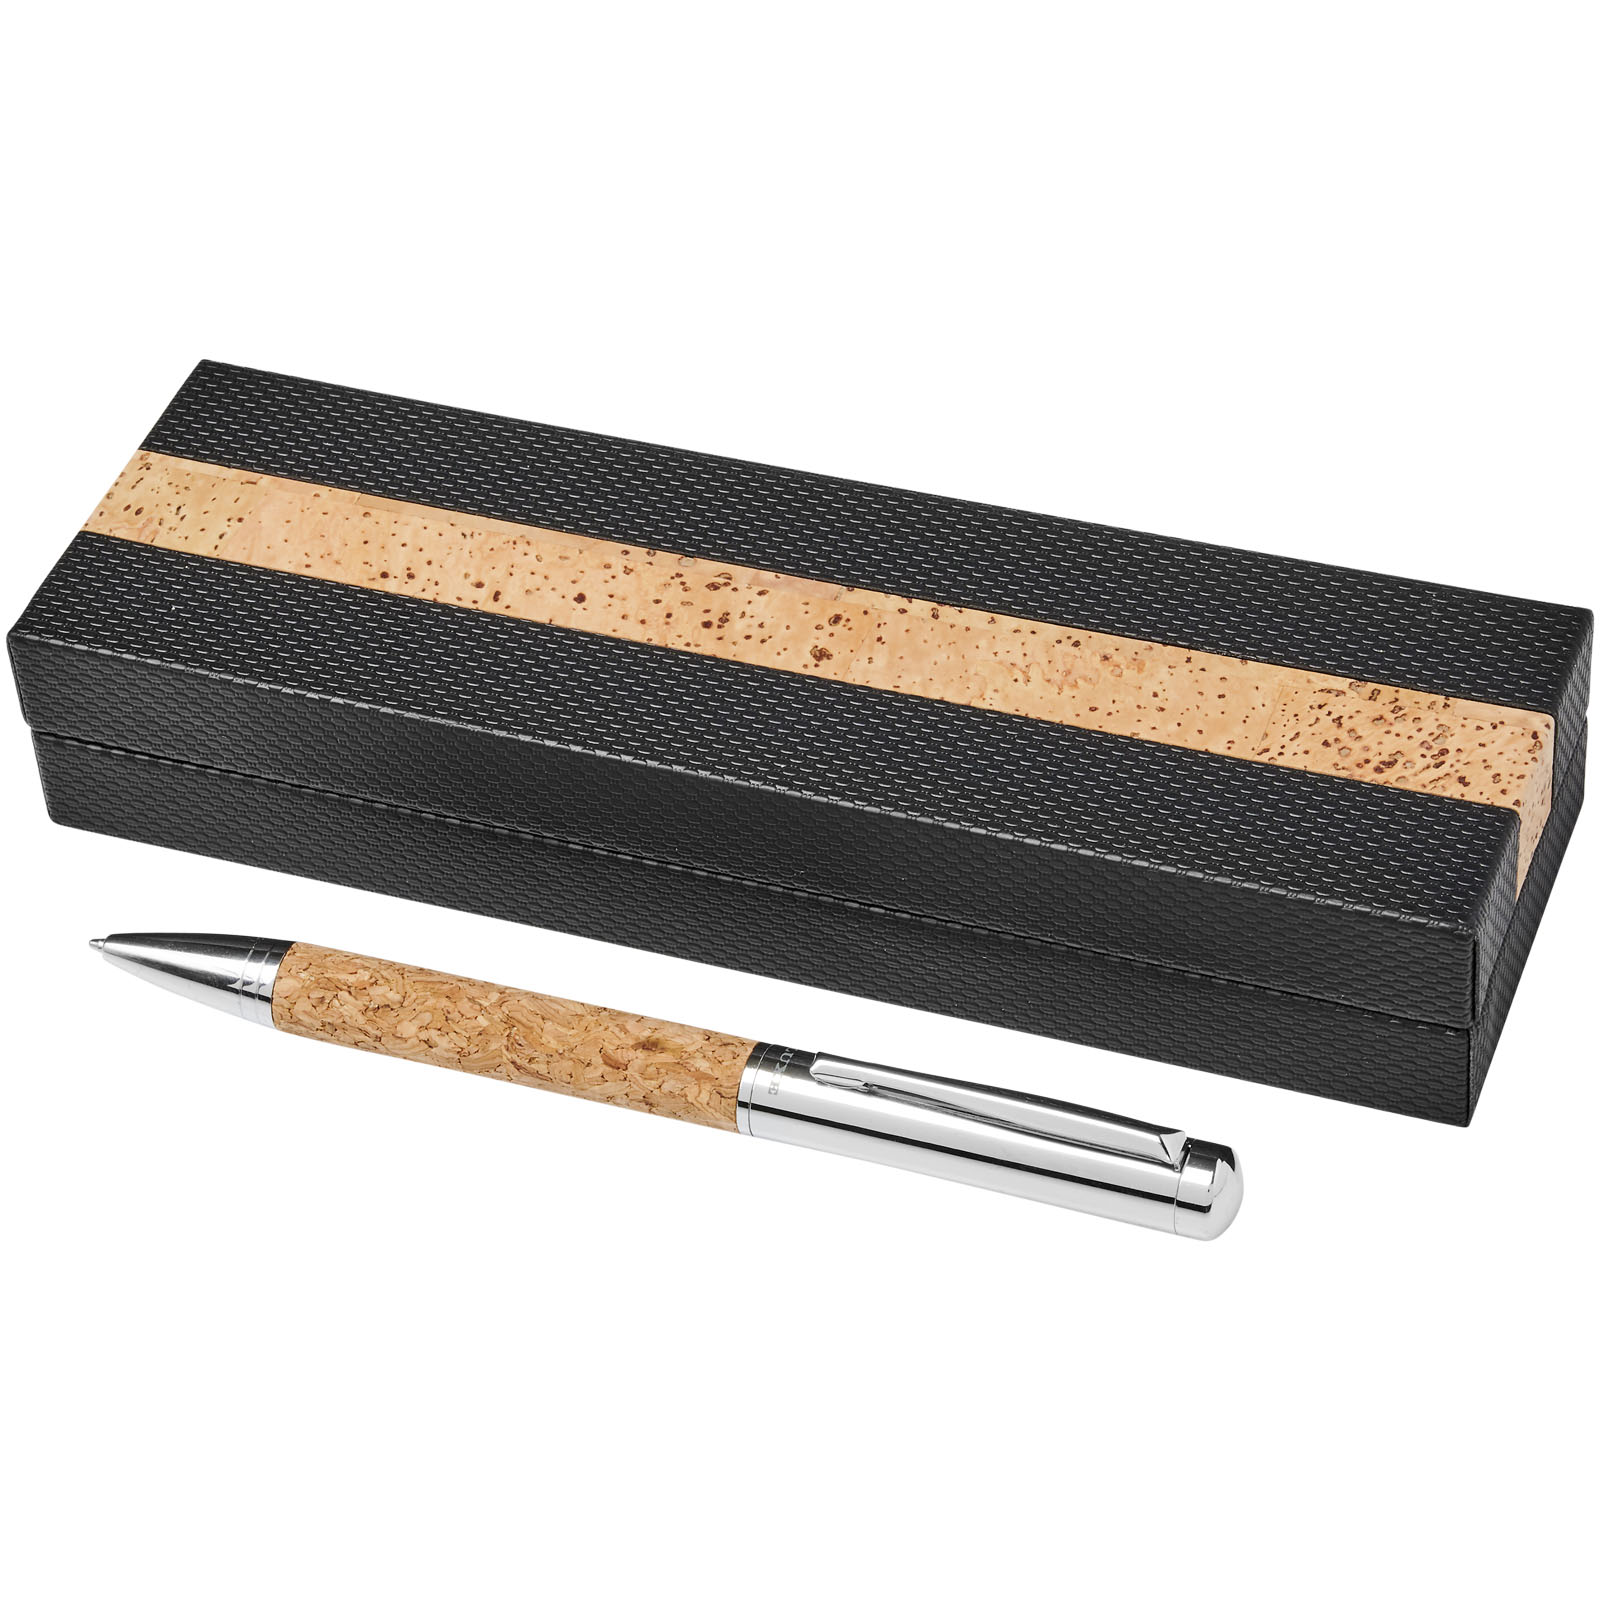 This product is a twist action ballpoint pen that features details made of cork. - Cromer